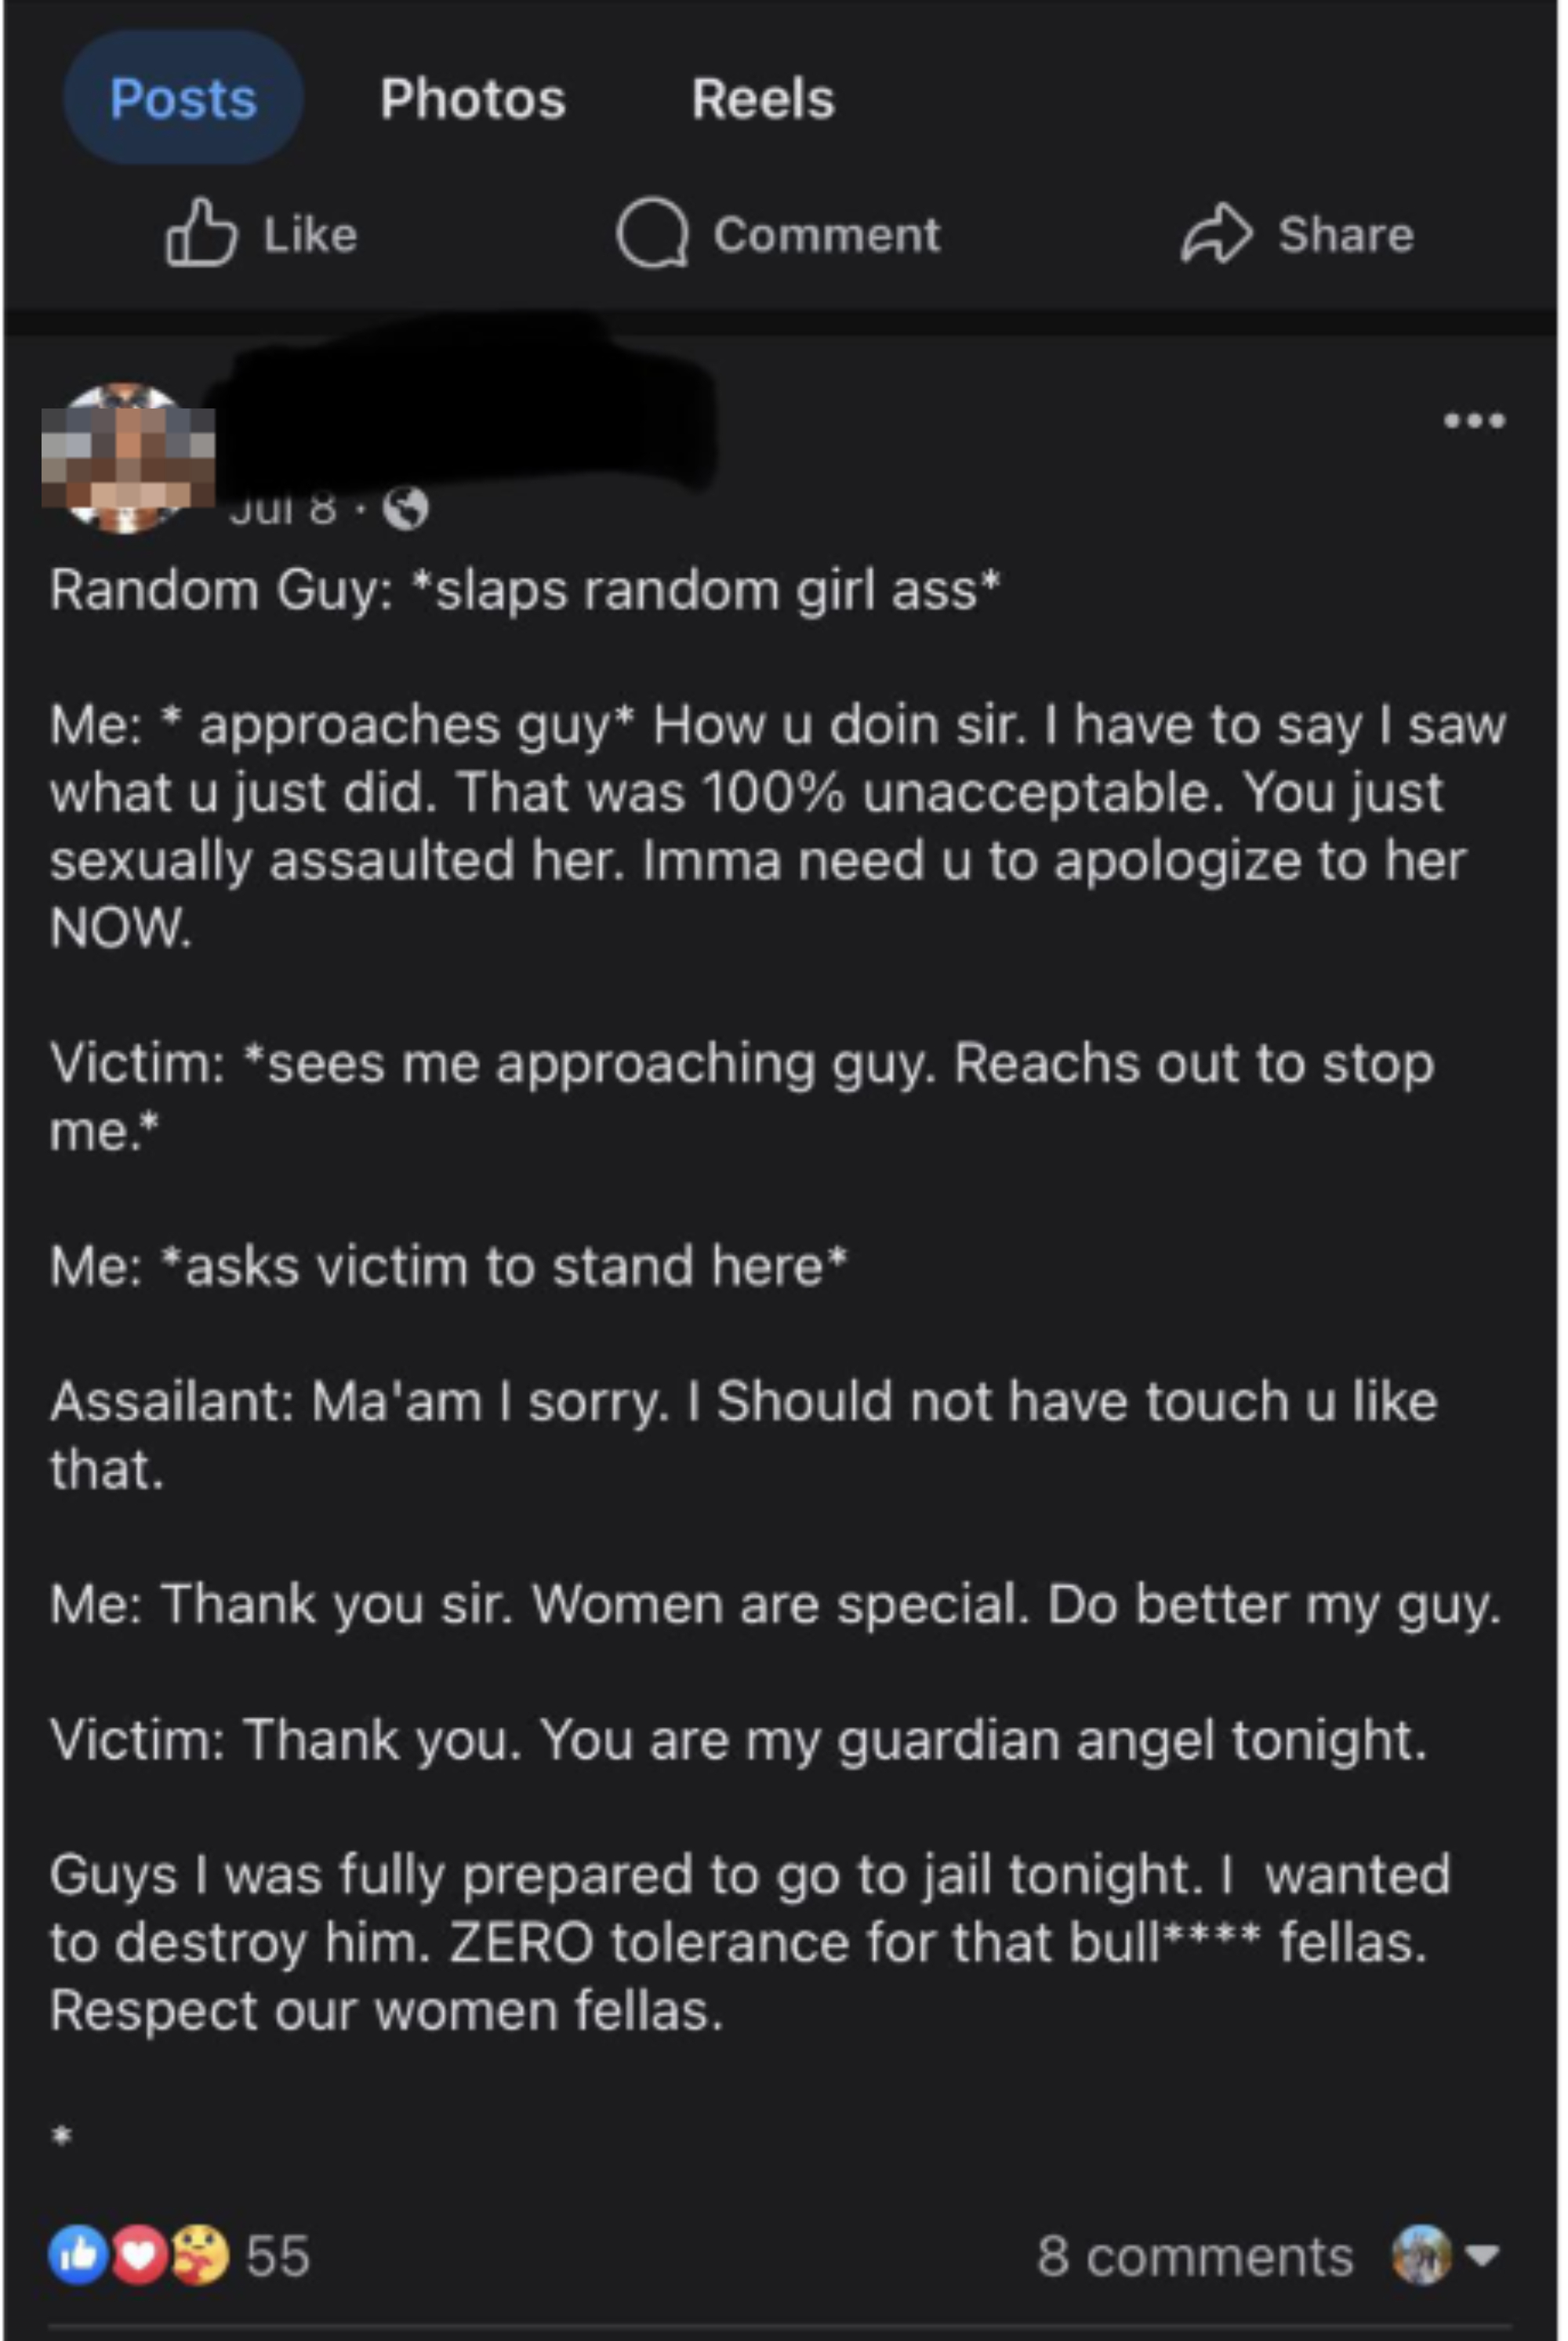 Man approaches guy who randomly slapped a girl&#x27;s ass and says &quot;you sexually assaulted her,&quot; tells him to apologize, which the assailant does, and the woman calls him her guardian angel; guy says he was &quot;prepared to go to jail&quot;